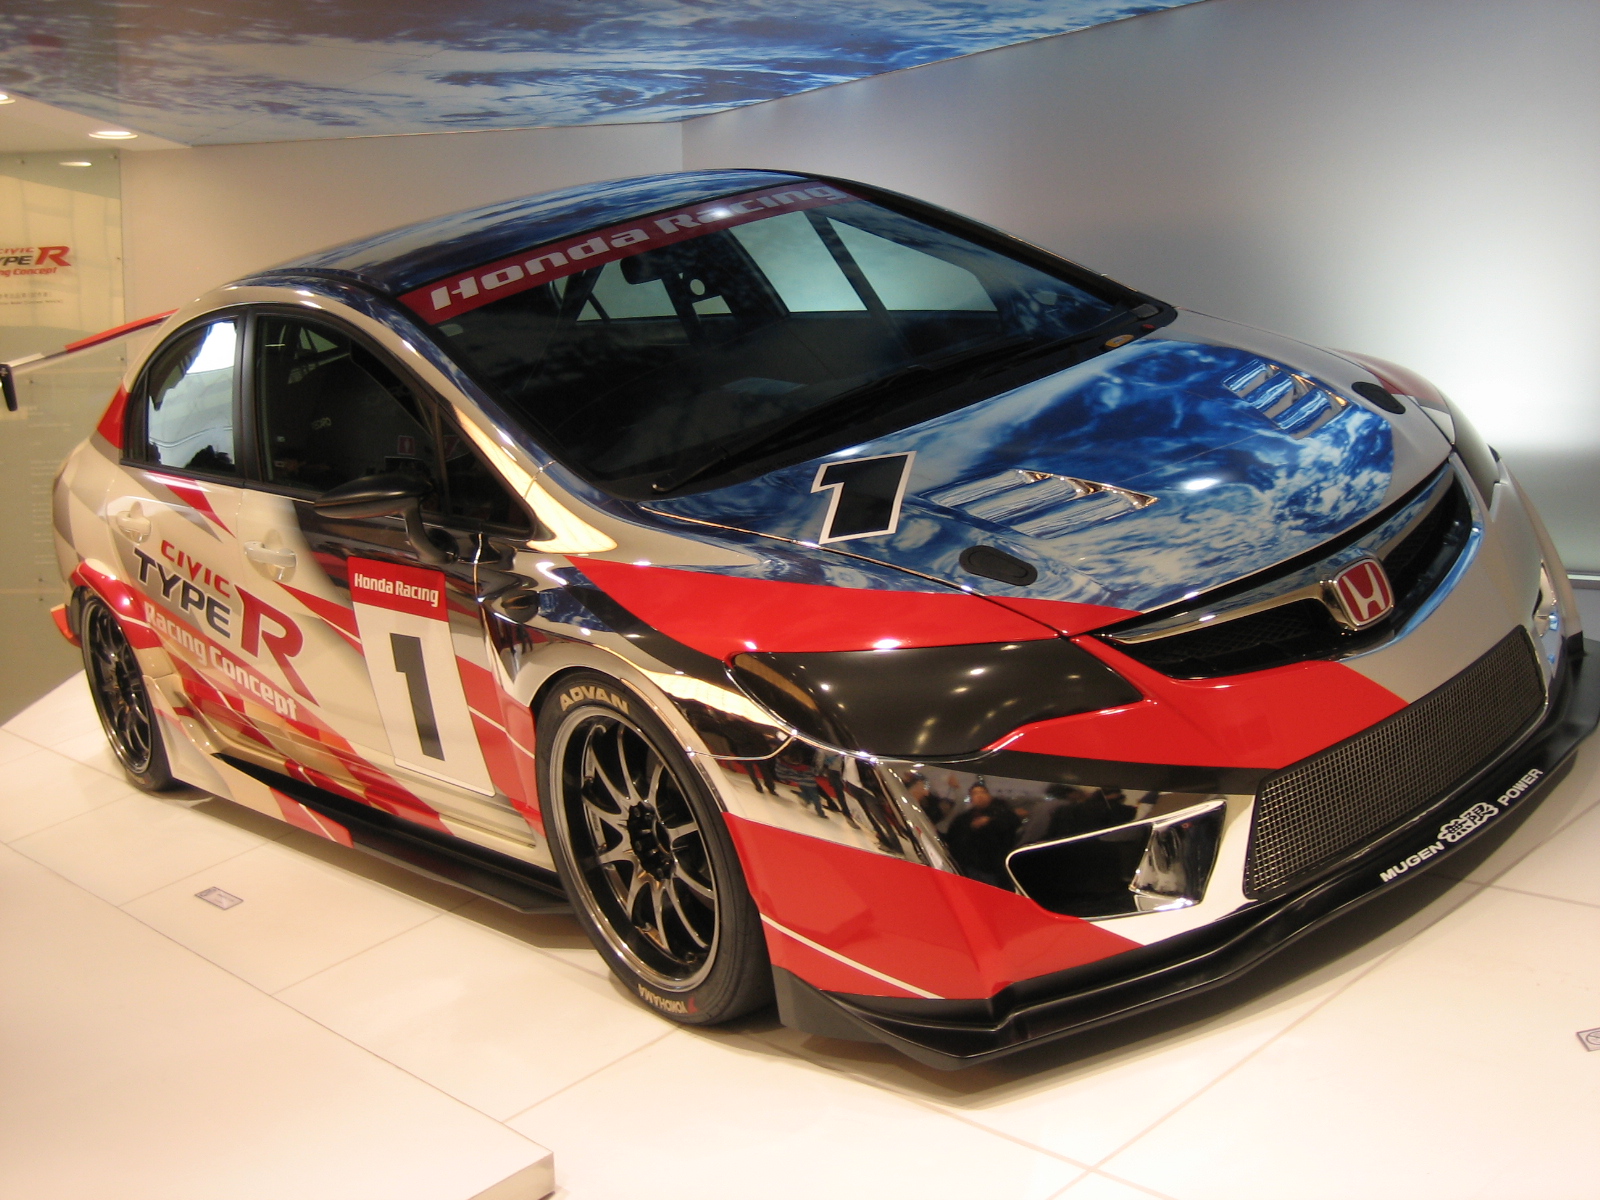 Honda Type R Package a goal of its future. Designs with it arrives in